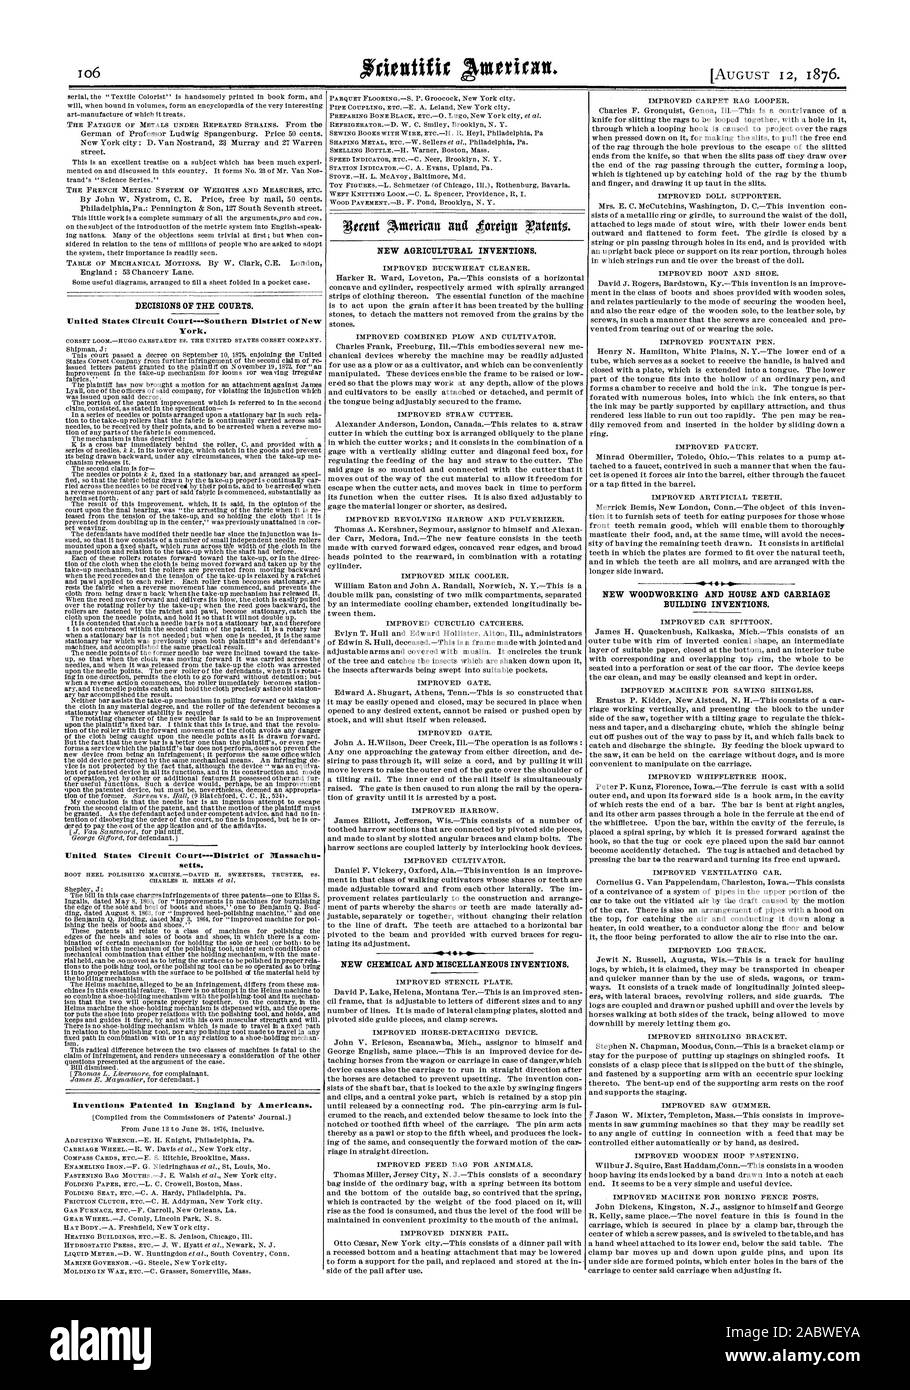 United States Circuit CourtSouthern District of New York. setts. BOOT HEEL POLISHING MACHINEDAVID H. SWEETSER TRUSTEE 08. Inventions Patented in England by Americans. NEW AGRICULTURAL INVENTIONS. NEW CHEMICAL AND MISCELLANEOUS INVENTIONS. NEW WOODWORKING AND HOUSE AND CARRIAGE BUILDING INVENTIONS., scientific american, 1876-08-11 Stock Photo